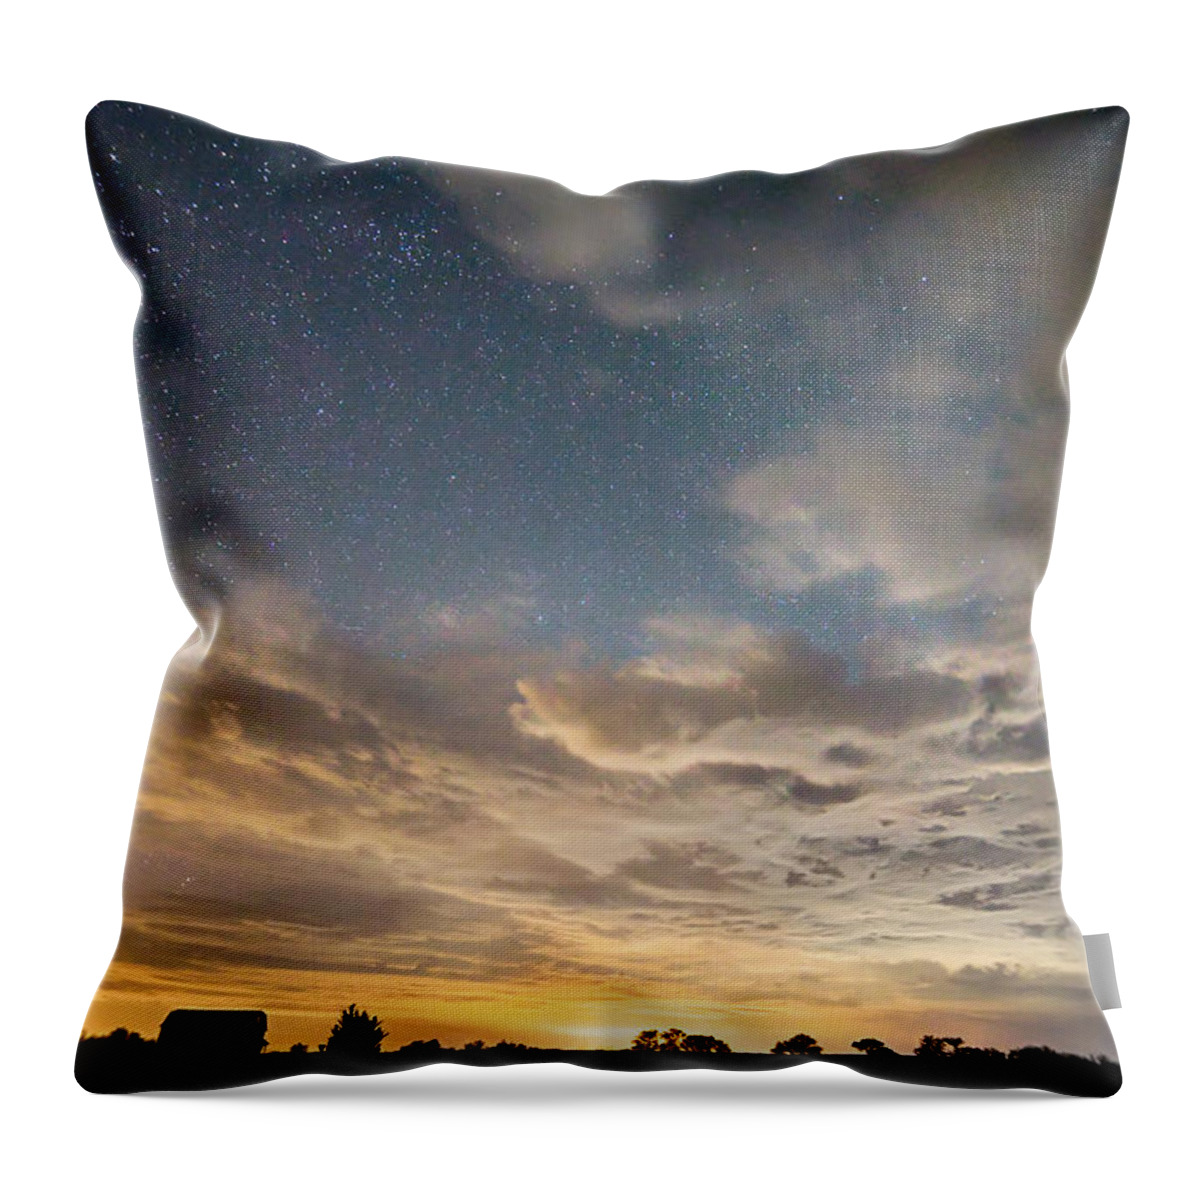 Colorado Throw Pillow featuring the photograph Wish Upon A Star by James BO Insogna